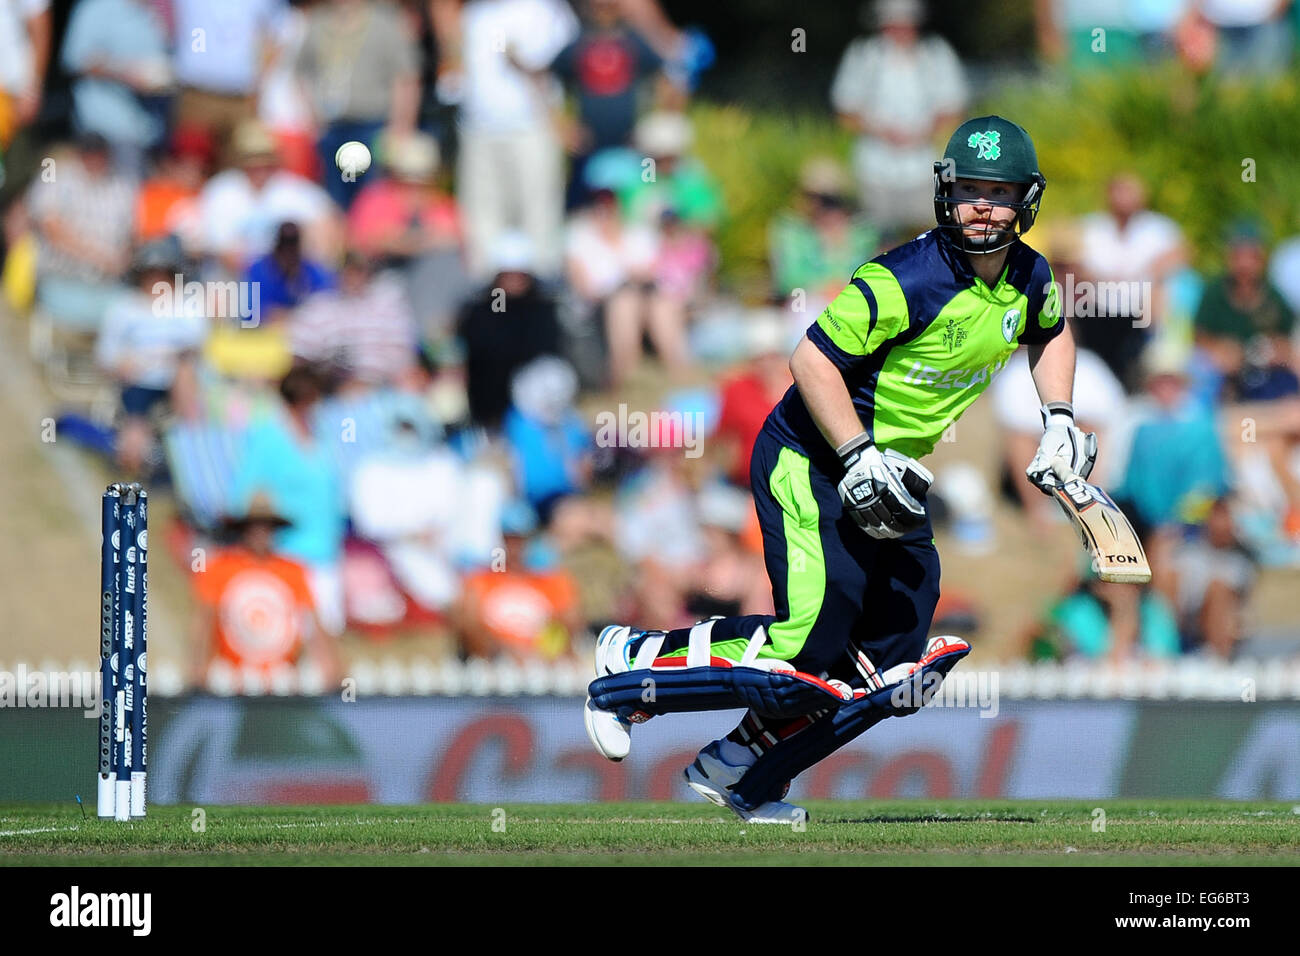 Nelson, New Zealand. 16th Feb, 2015. Ireland player Paul Stirling during the 2015 ICC Cricket World Cup match between West Indies and Ireland. Saxton Oval, Nelson, New Zealand. © Action Plus Sports/Alamy Live News Stock Photo